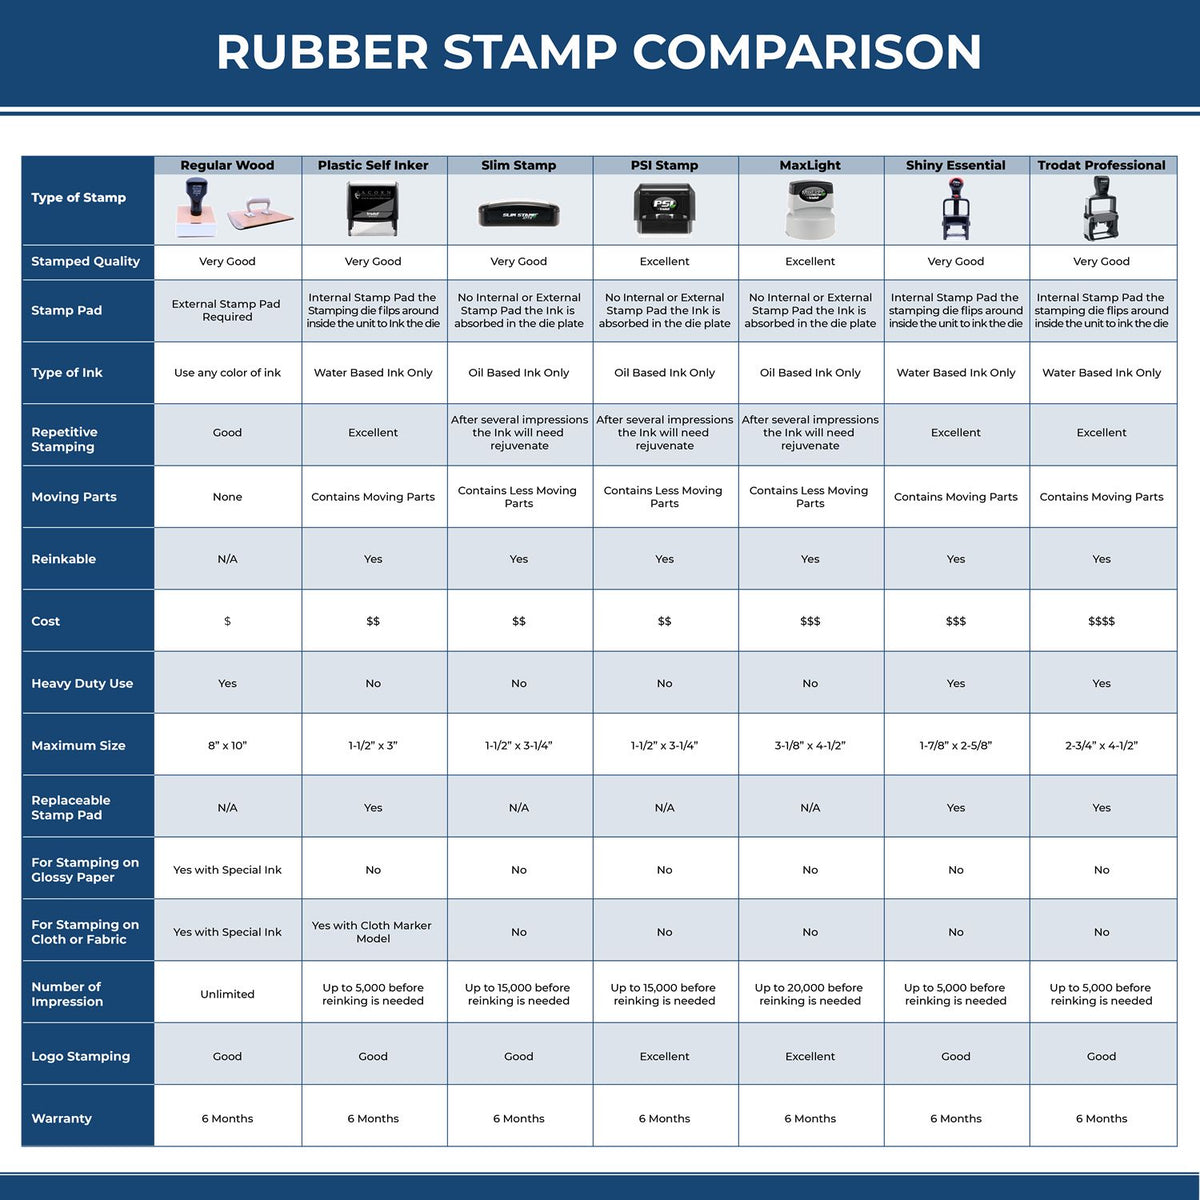 A comparison chart for the different types of mount models available for the MaxLight Premium Pre-Inked Idaho Rectangular Notarial Stamp.